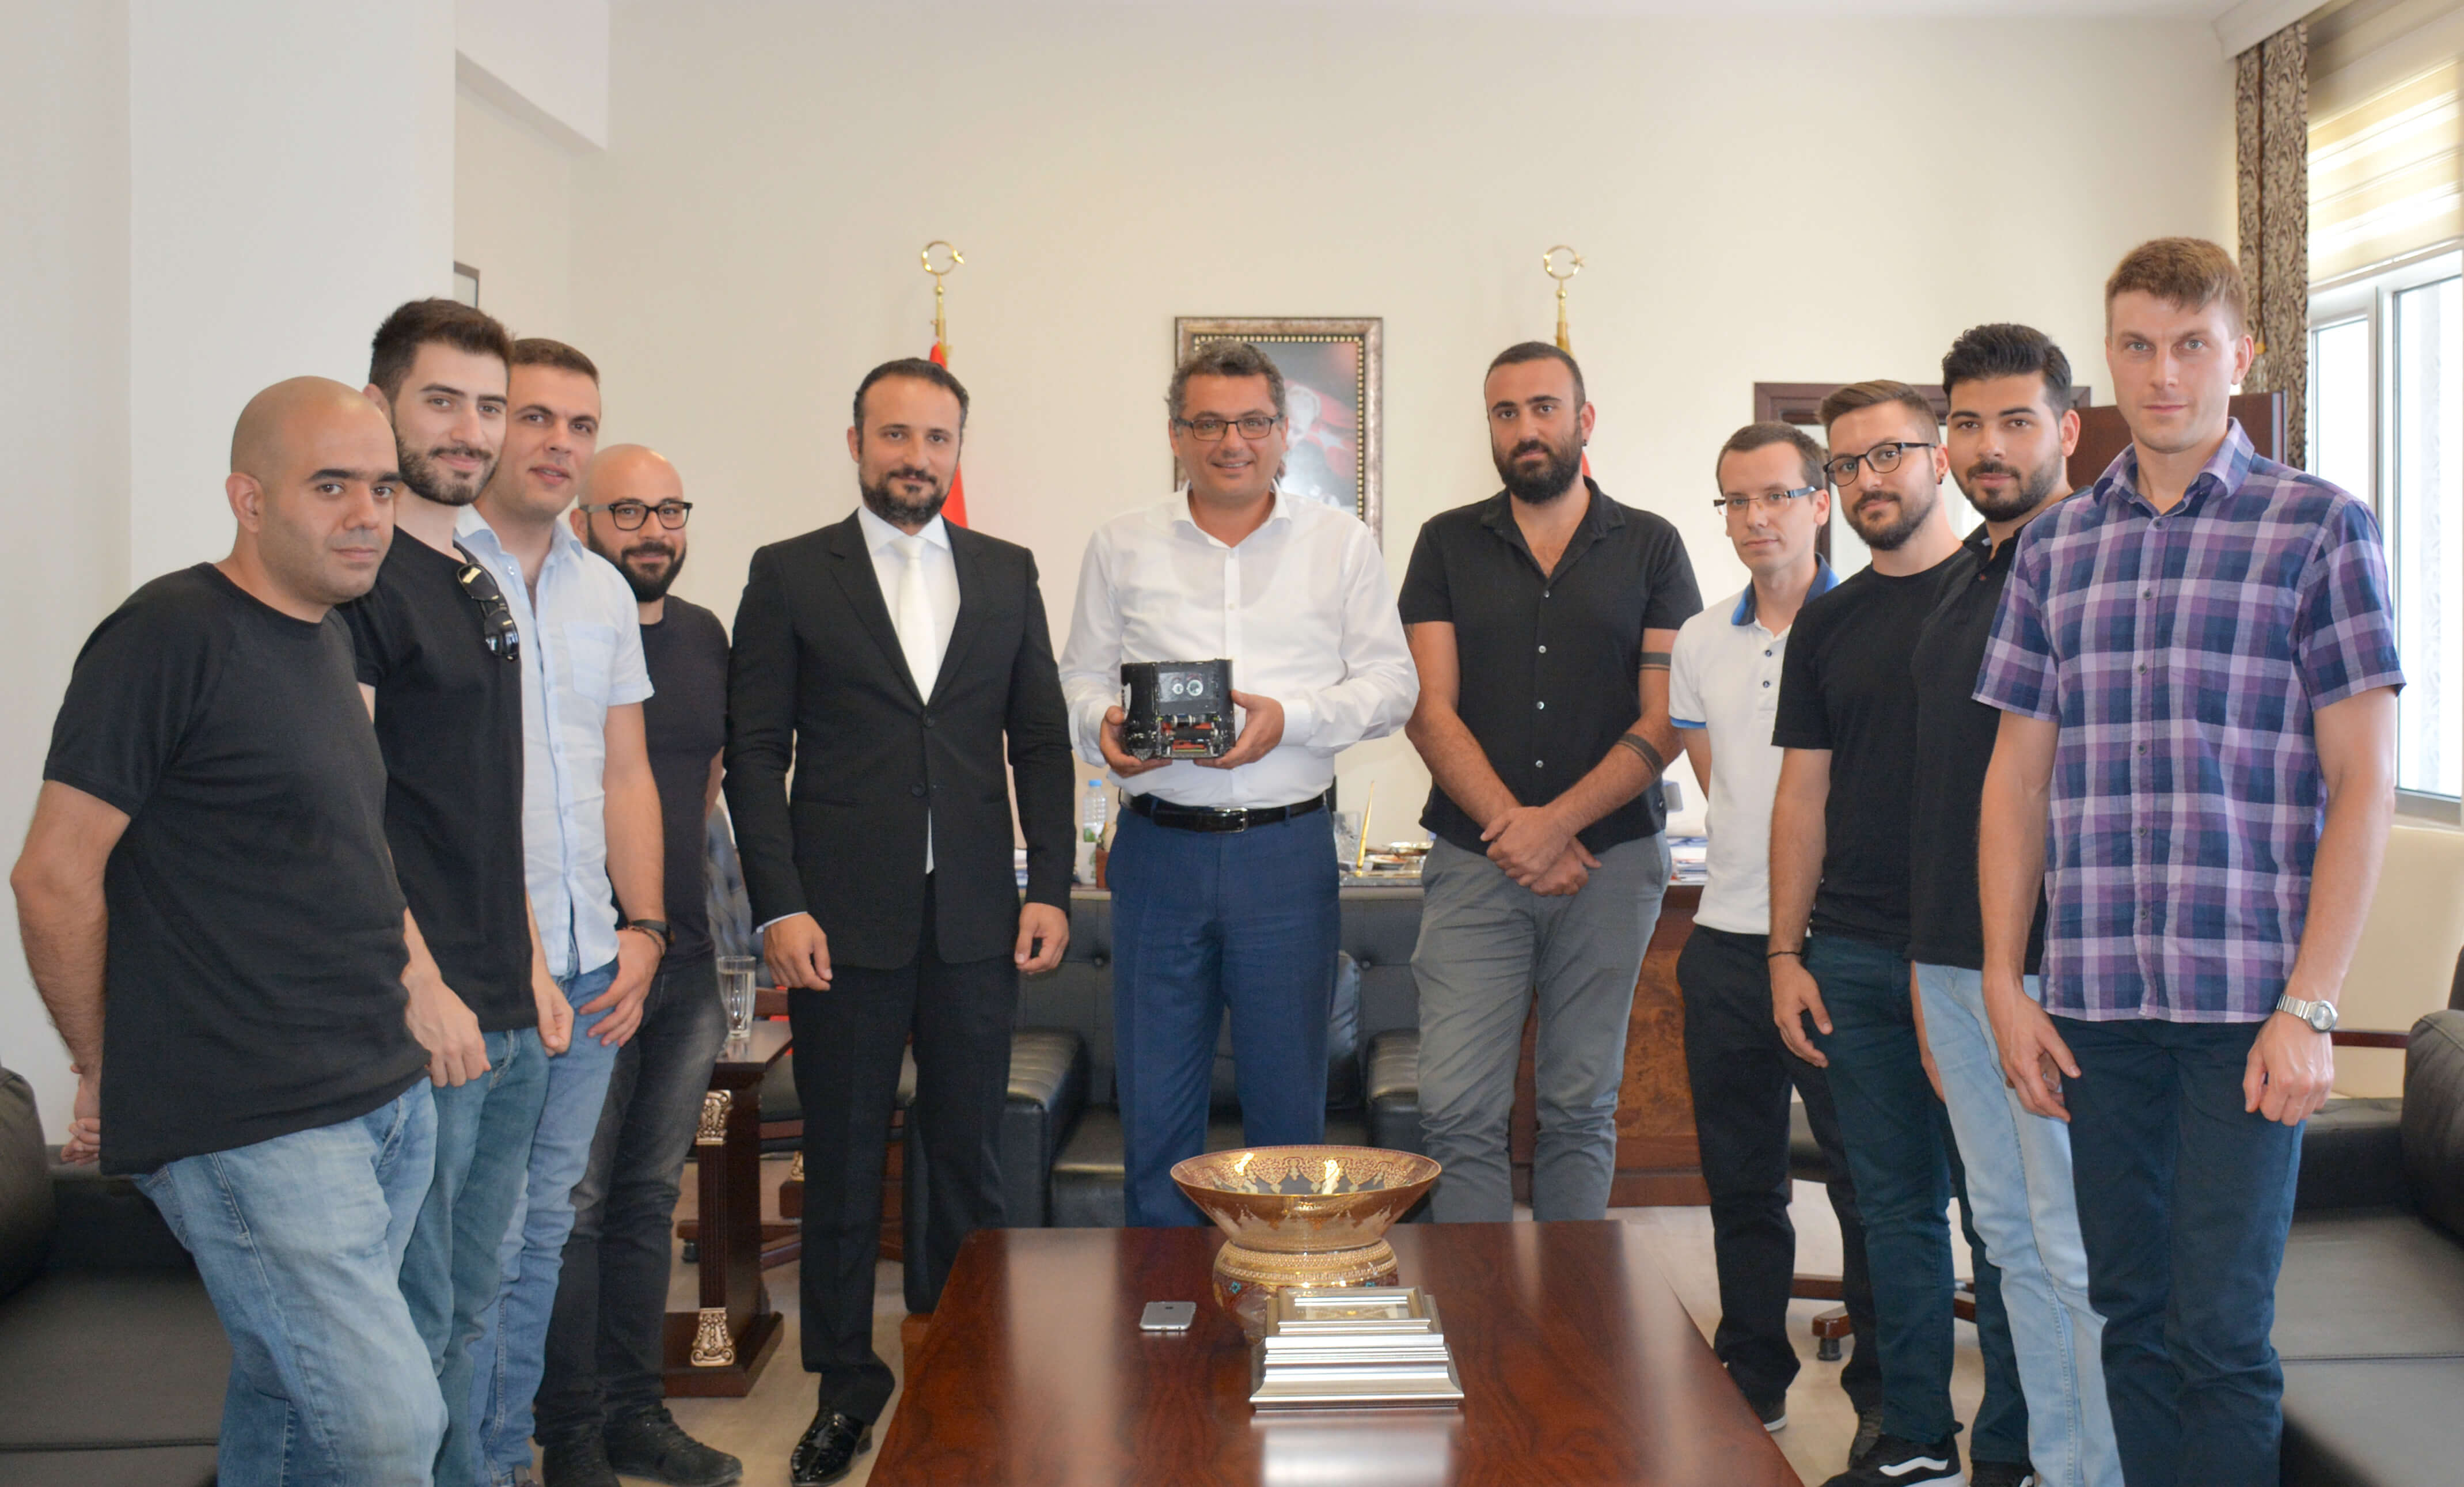 Information regarding the works that carried out in Near East University Robotic Laboratory on Autonomous (Unmanned) Bus was shared with the Prime Minister Tufan Erhürman